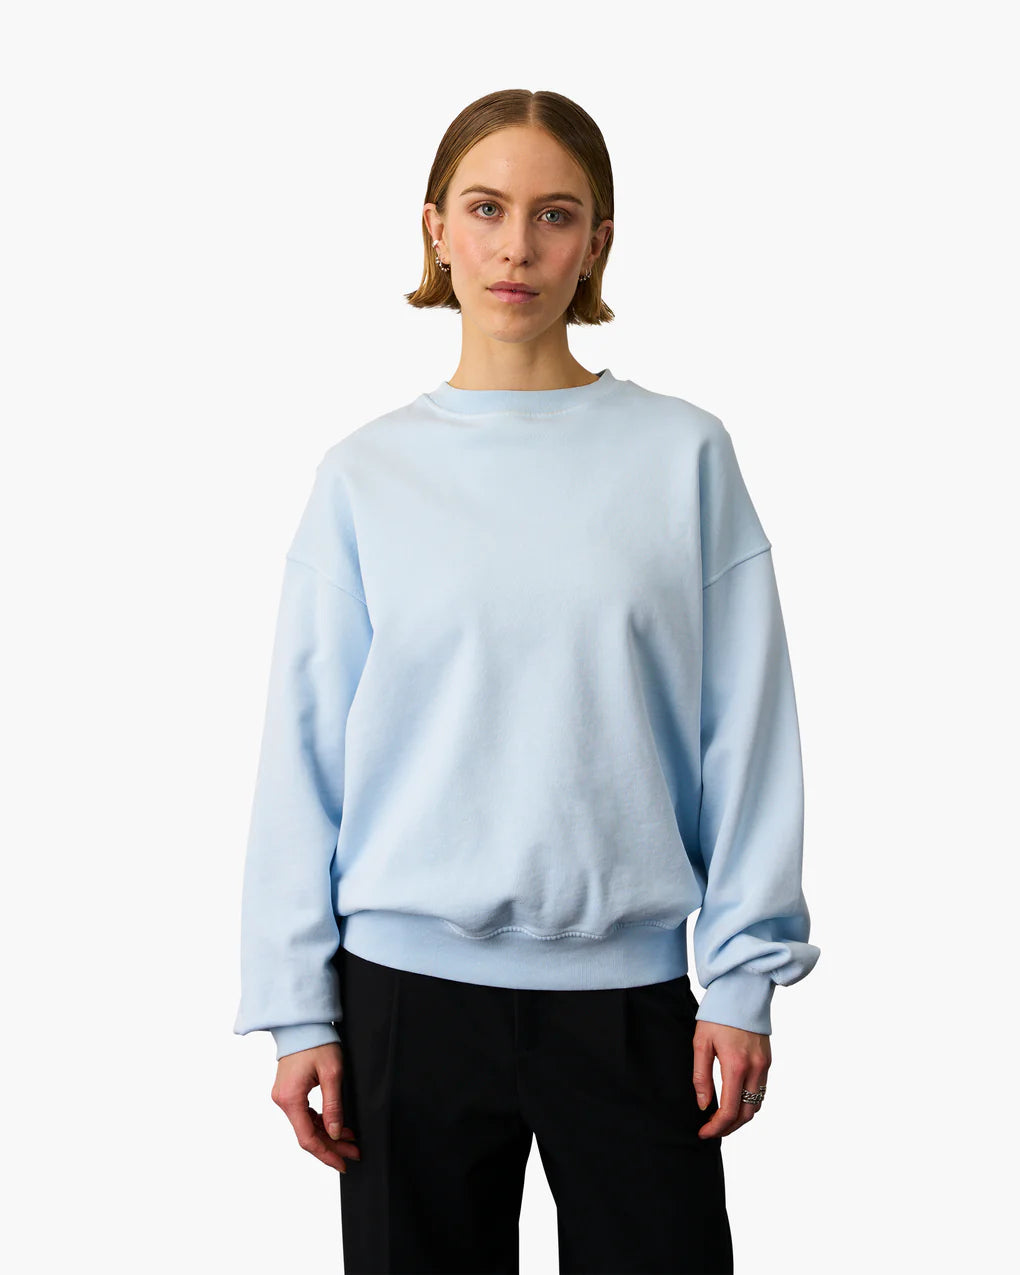 The model is wearing the Colorful Standard Organic Oversized Crew - Faded Black.